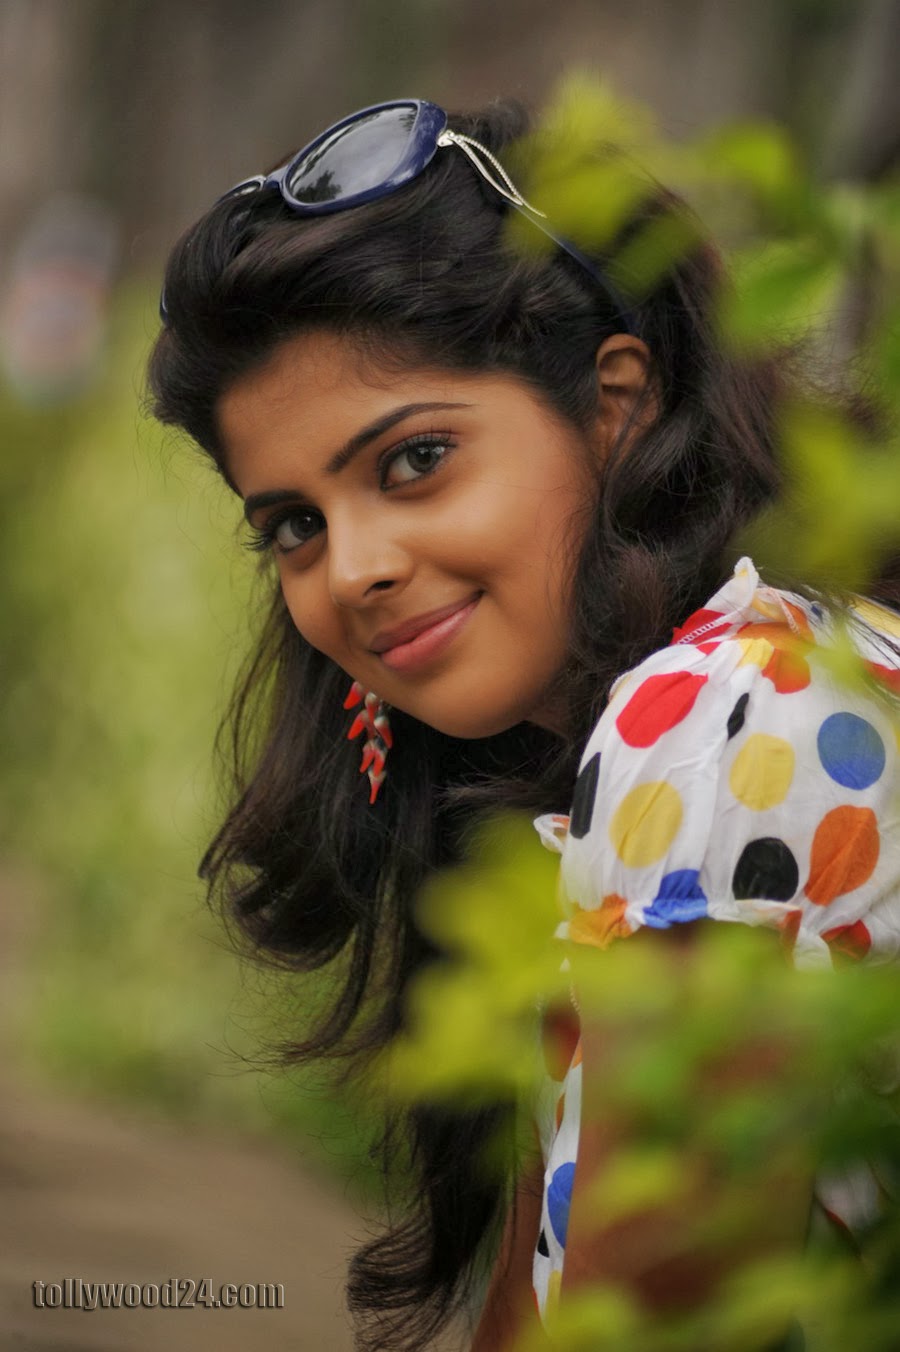 hero wallpapers heroine photo gallery,hair,beauty,hairstyle,photography,smile